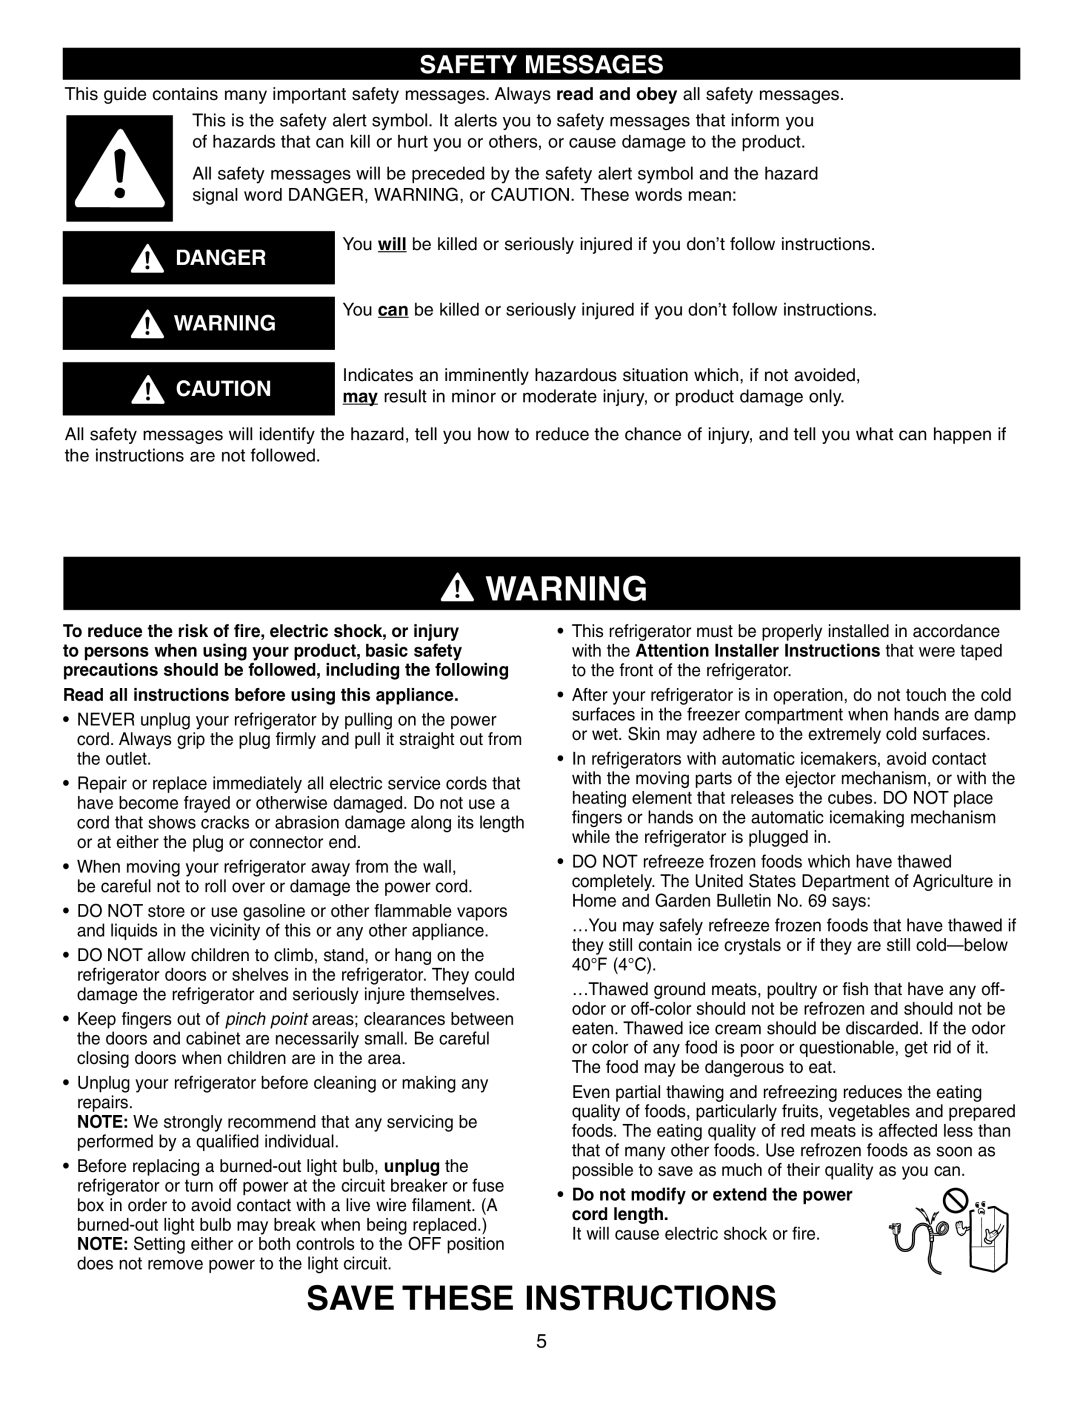 LG Electronics LFC25760 Save These Instructions, Safety Messages, Danger, Do not modify or extend the power cord length 